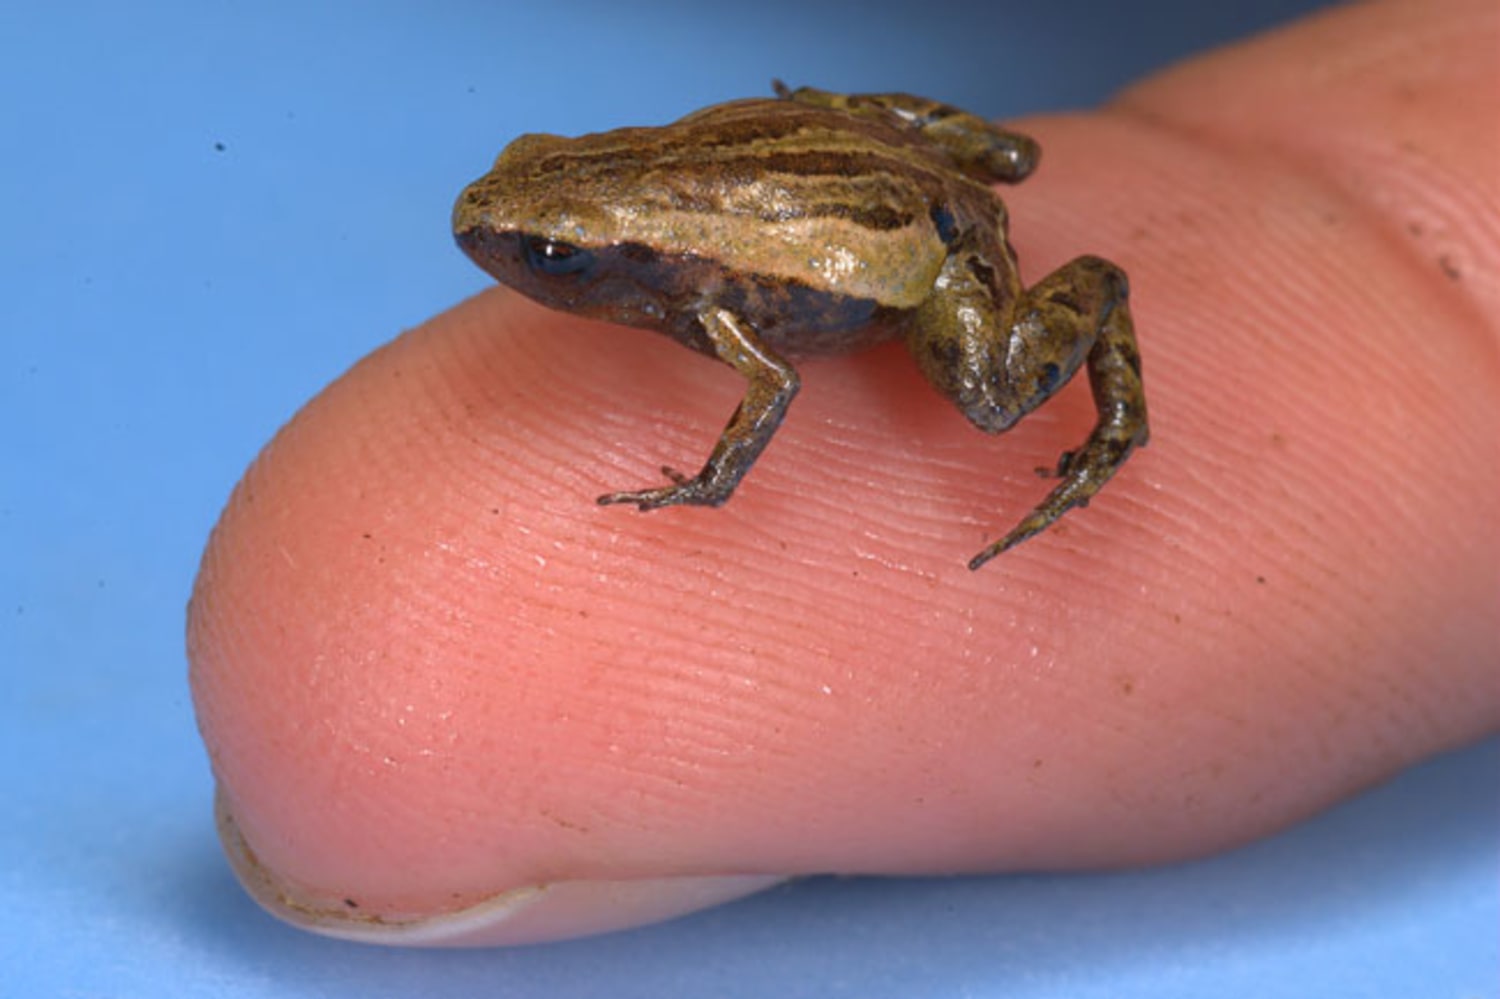 Teeny-tiny frog discovered in Peru